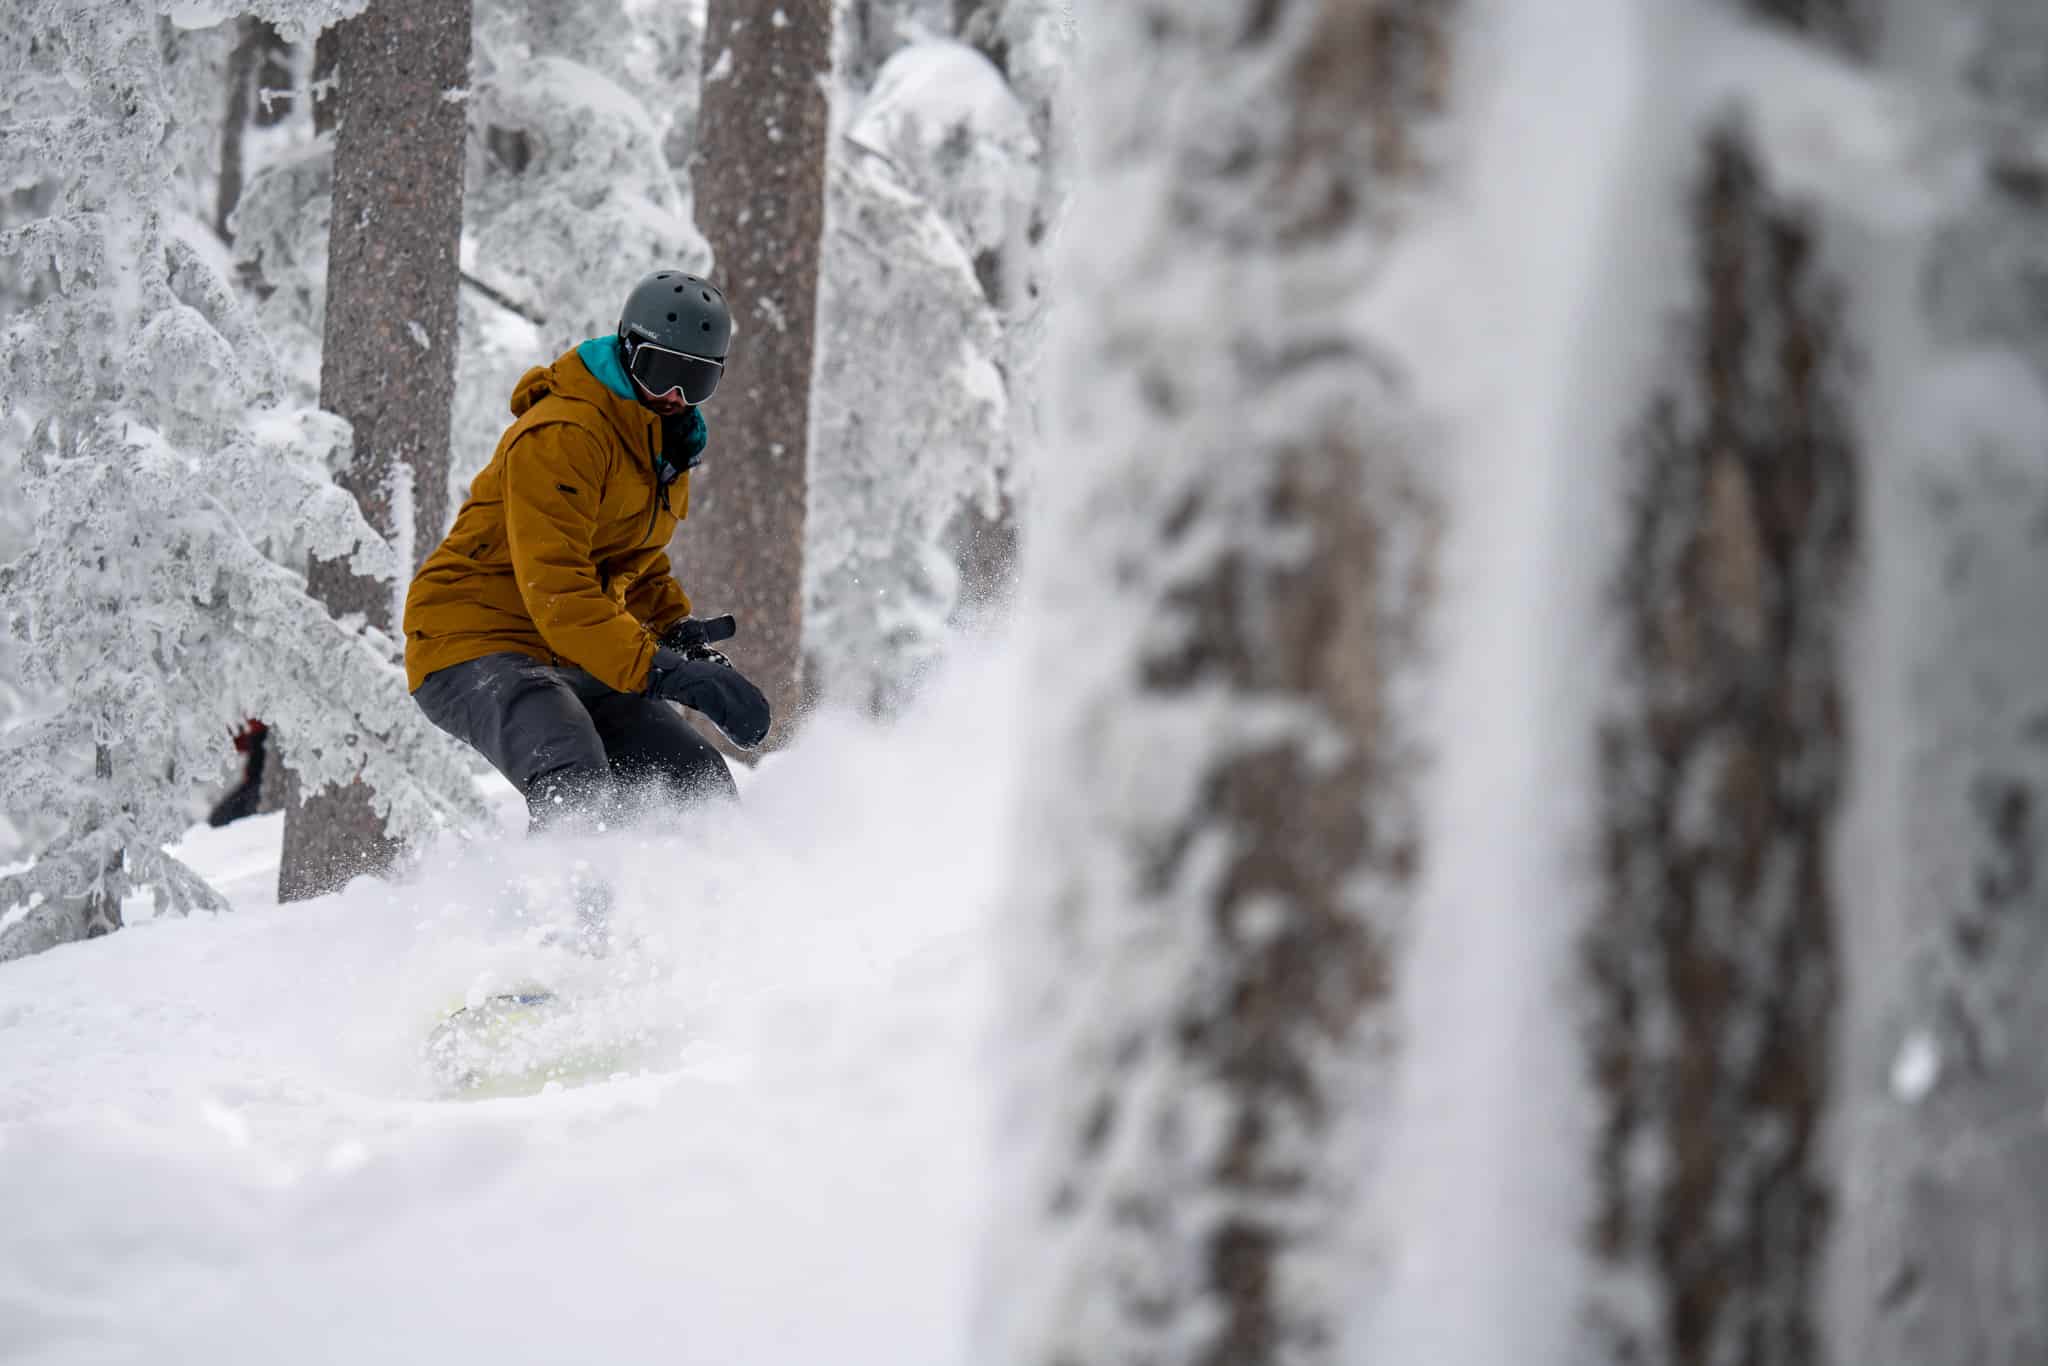 Snowboarder in powder riding trees